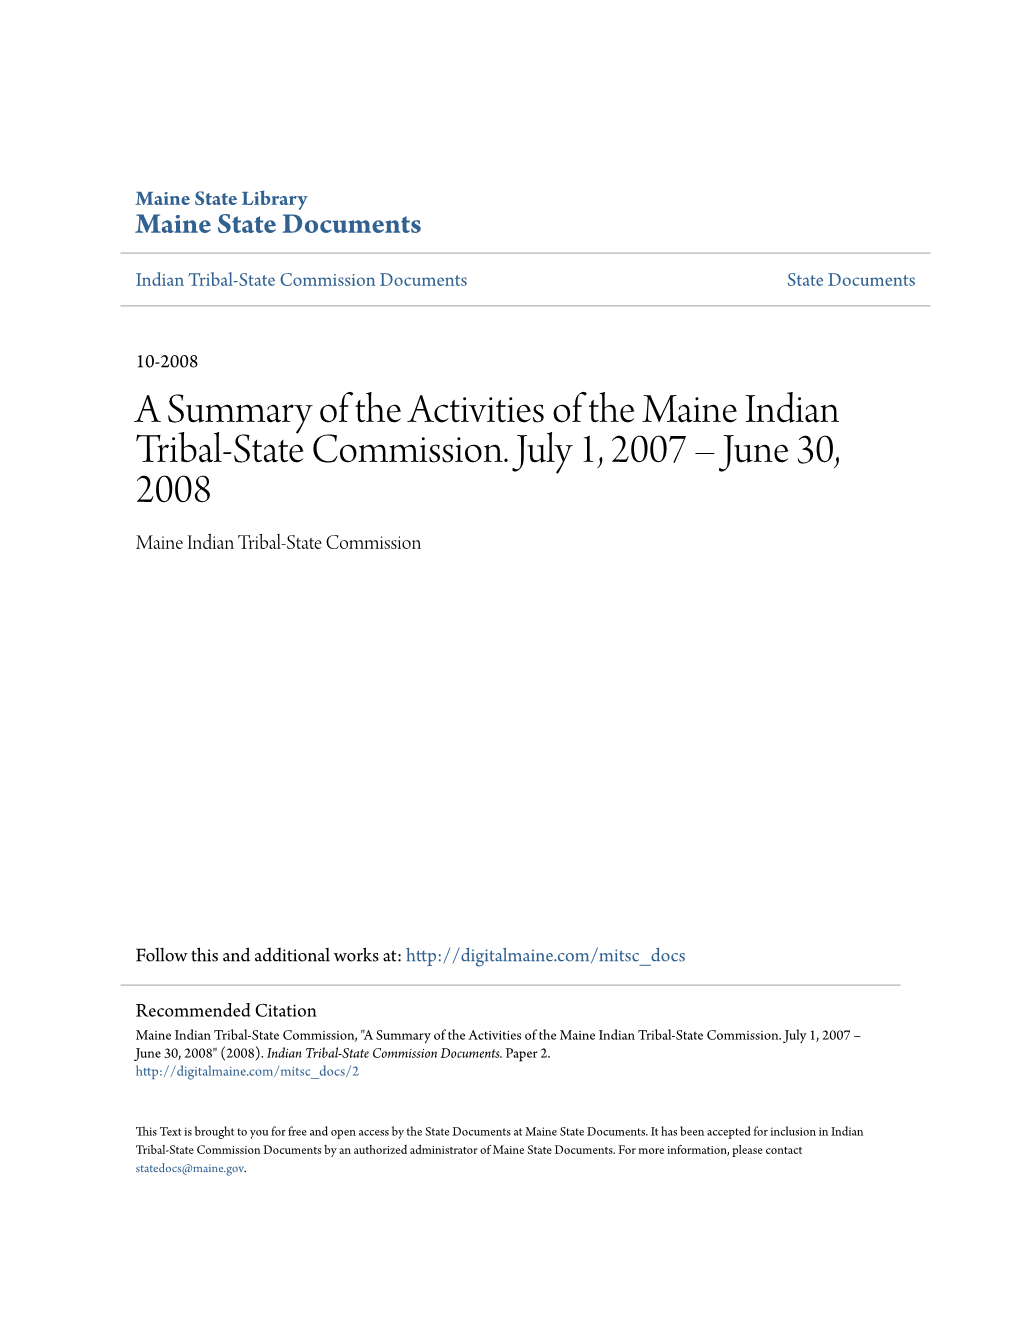 A Summary of the Activities of the Maine Indian Tribal-State Commission. July 1, 2007 Â•Fi June 30, 2008